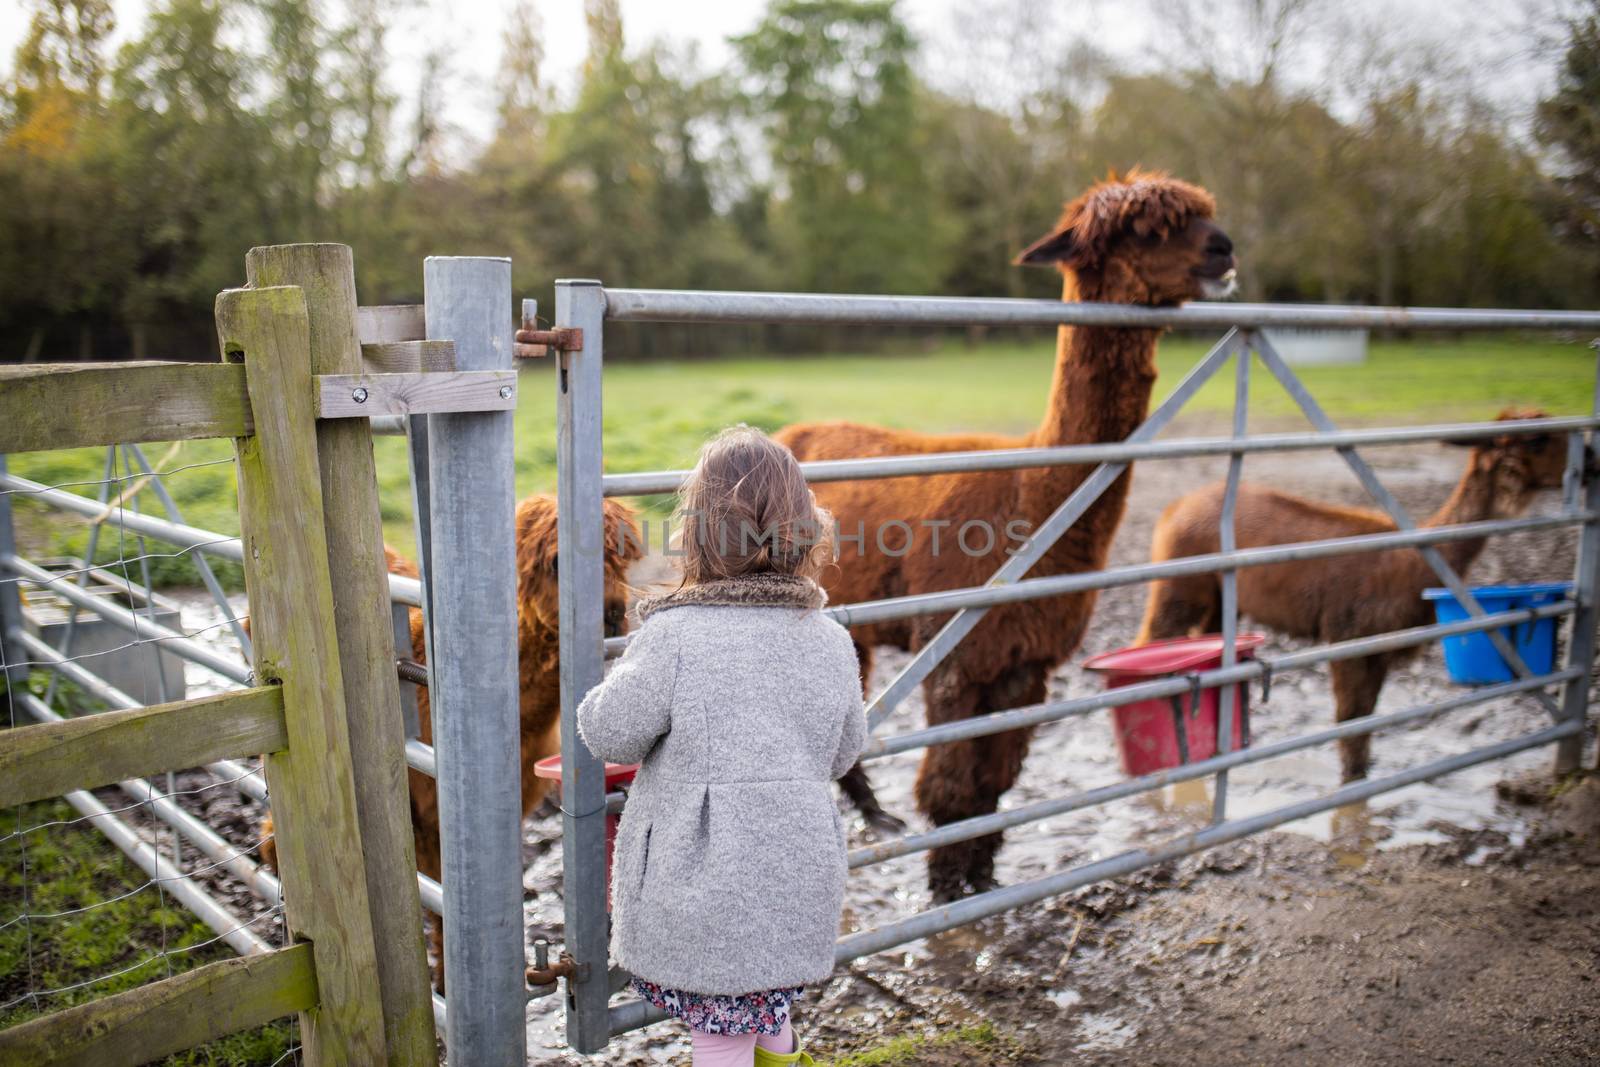 Rearview of a little brunette girl in a gray coat standing in front of brown alpacas that are eating behind a metal fence